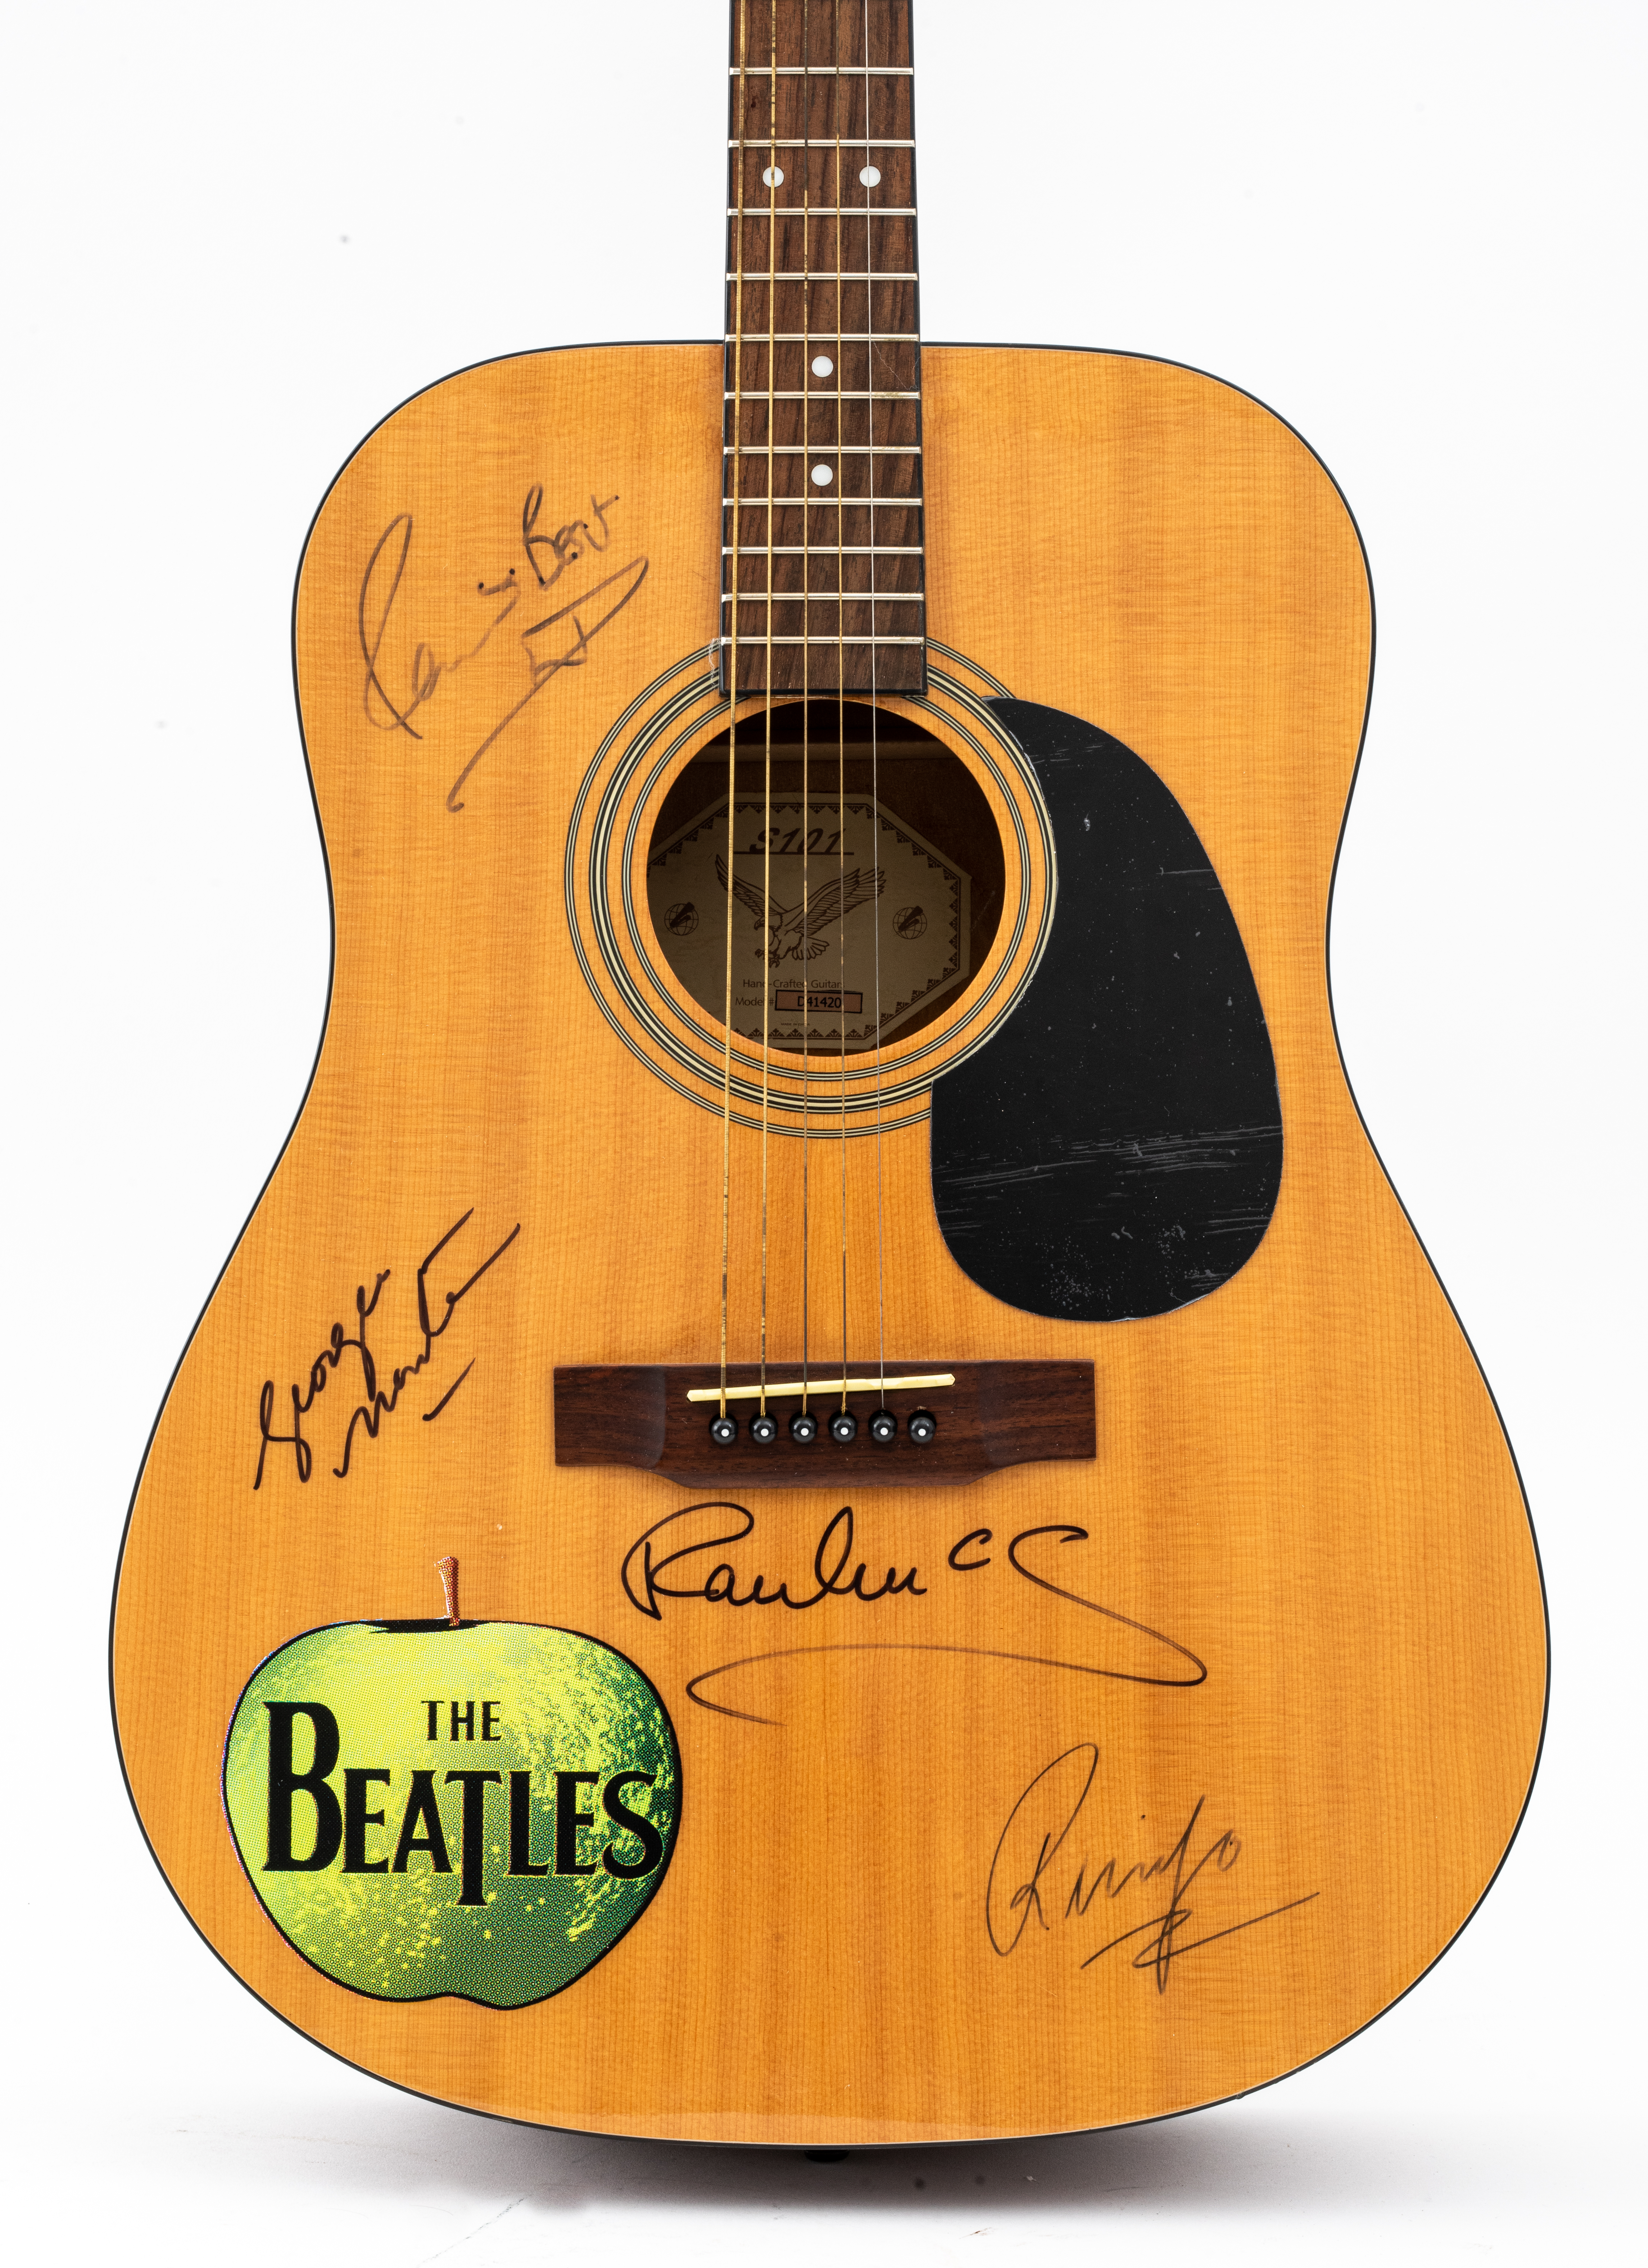 THE BEATLES AUTOGRAPHED GUITAR 363b5f